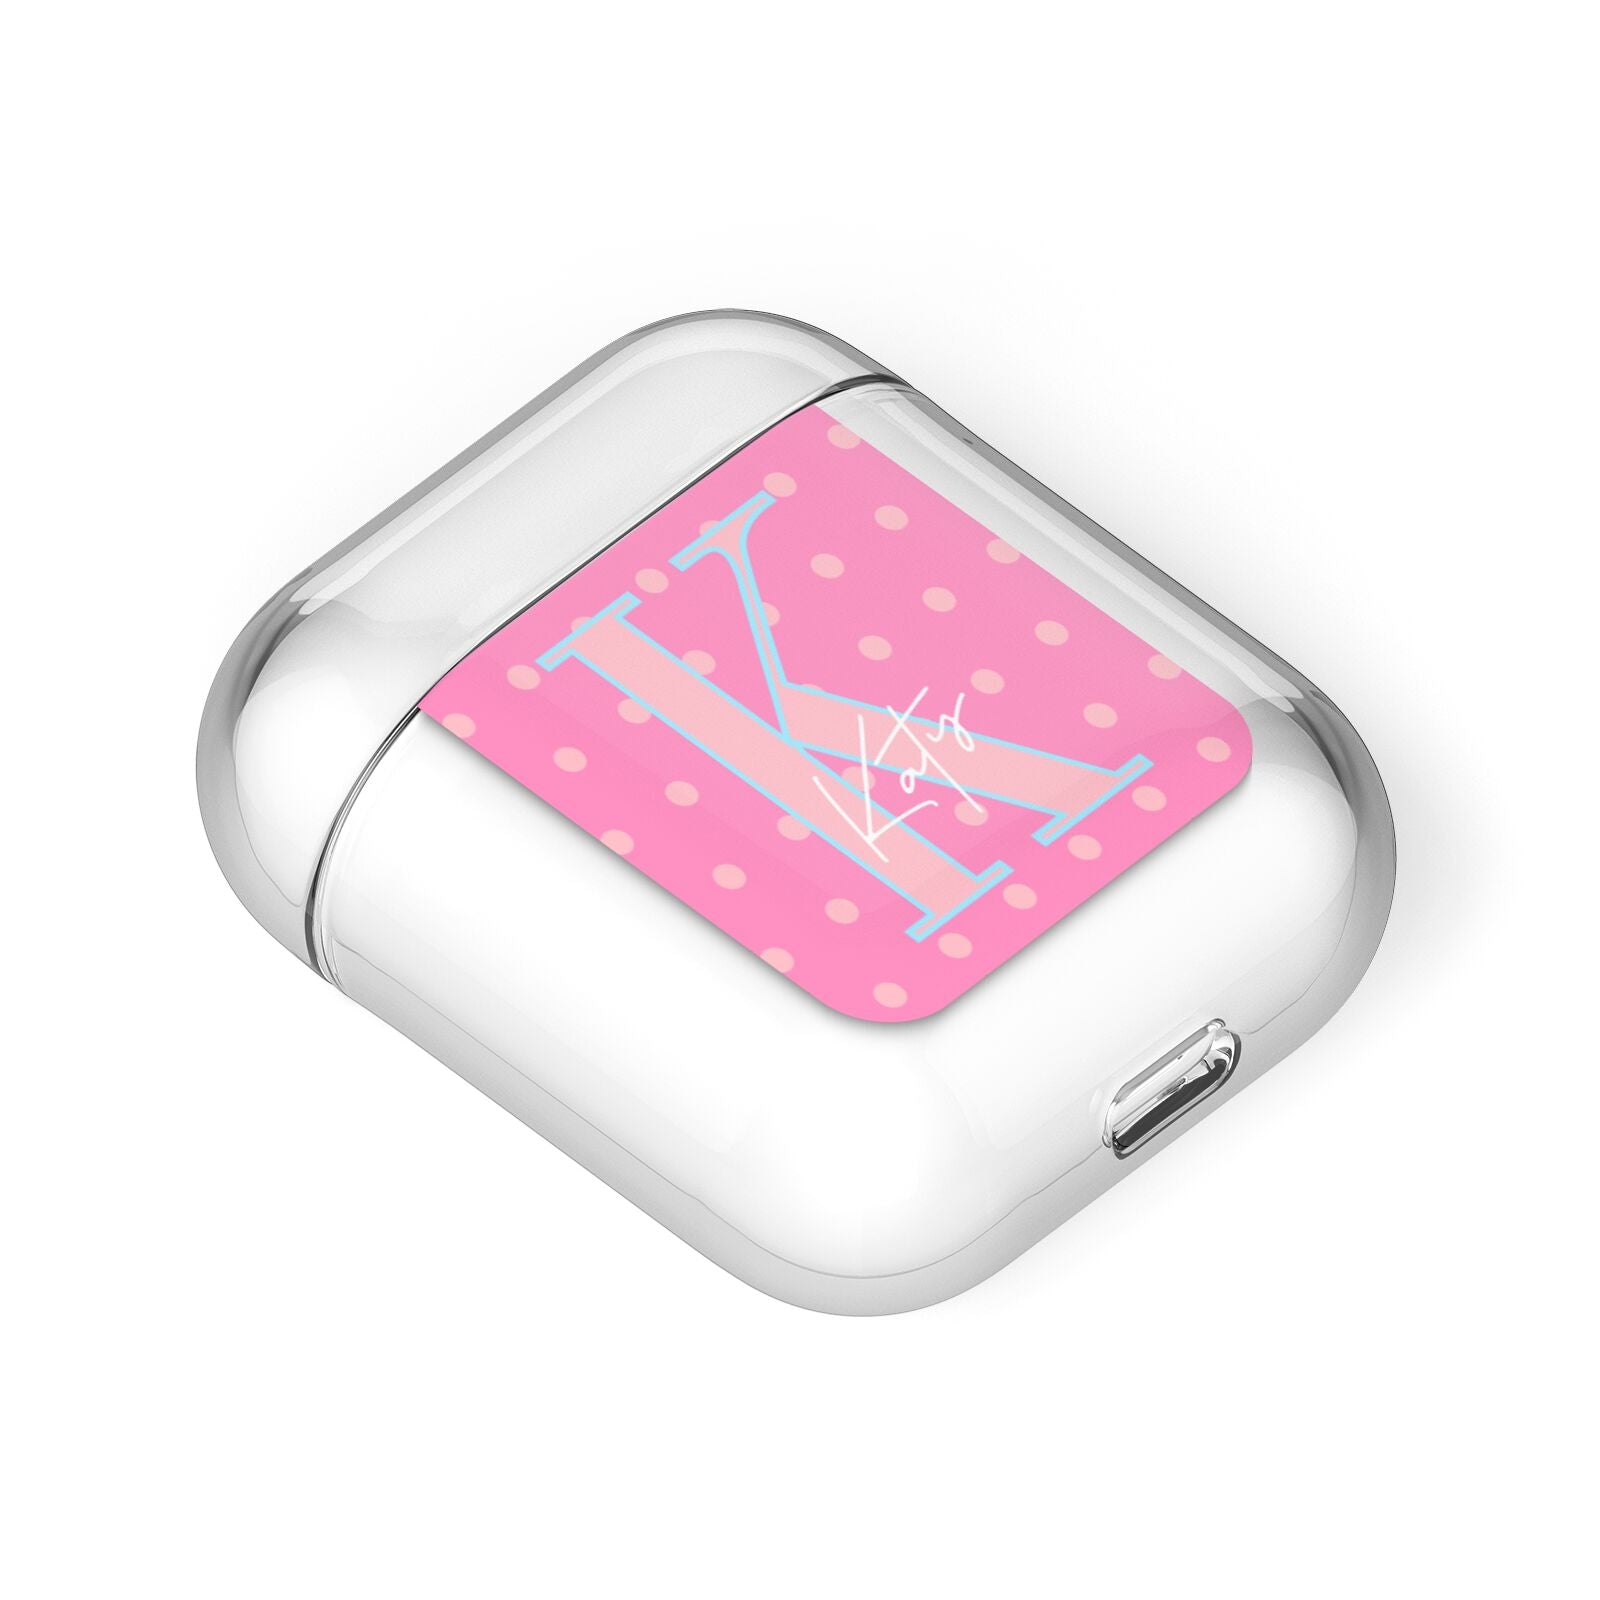 Personalised Pink Dots AirPods Case Laid Flat